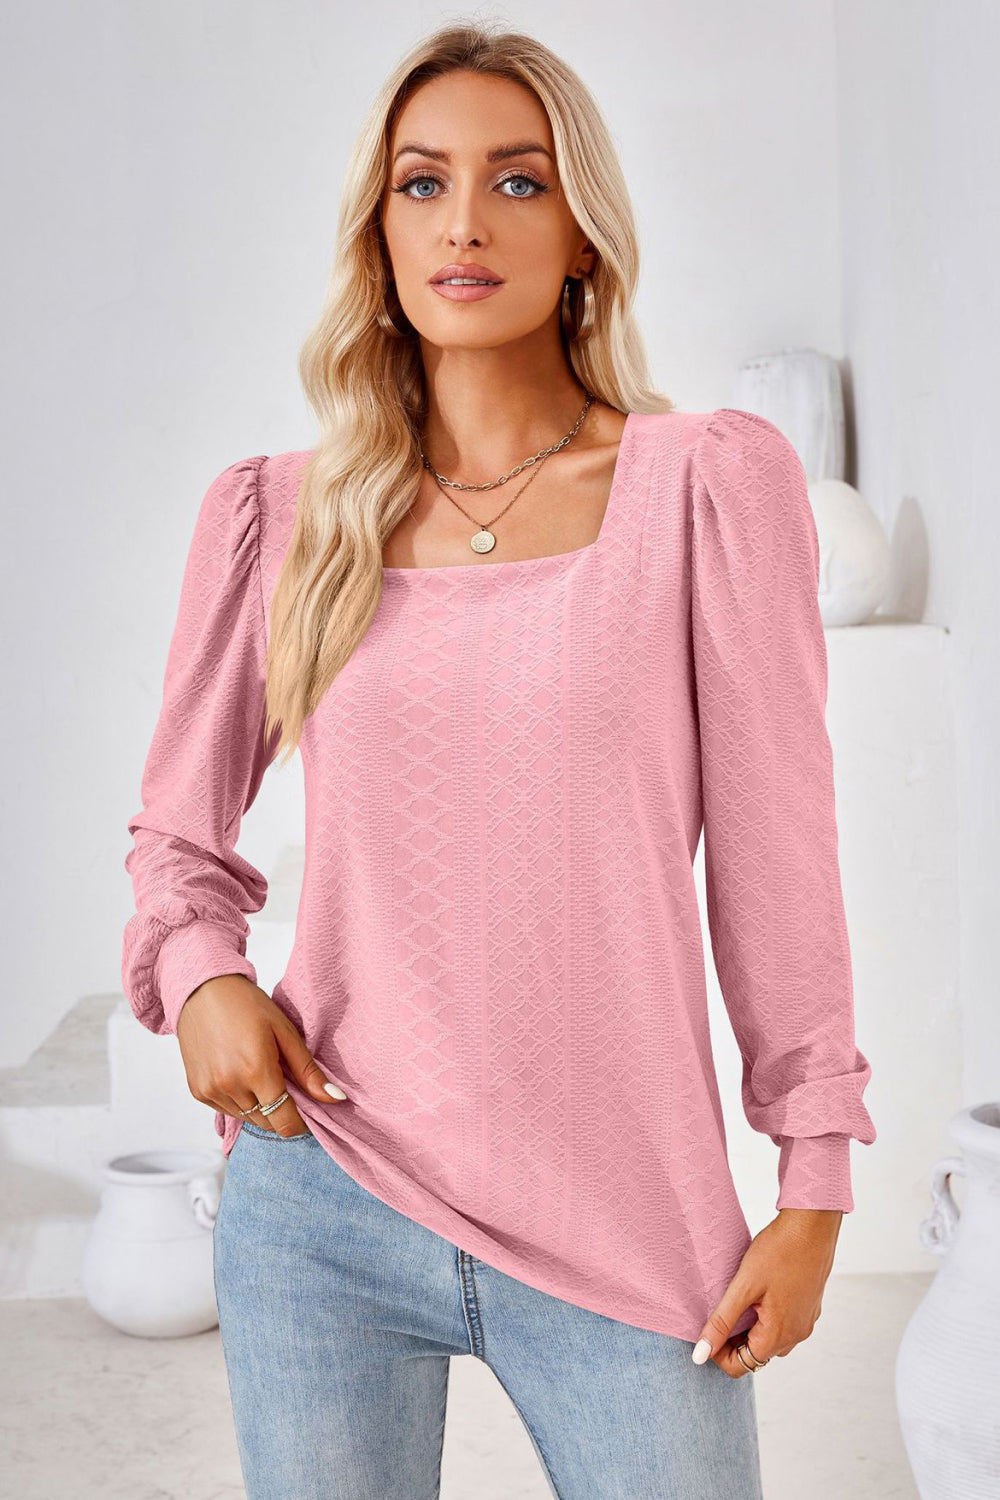 Square Neck Puff Sleeve Blouse - Pink / S - Women’s Clothing & Accessories - Shirts & Tops - 9 - 2024